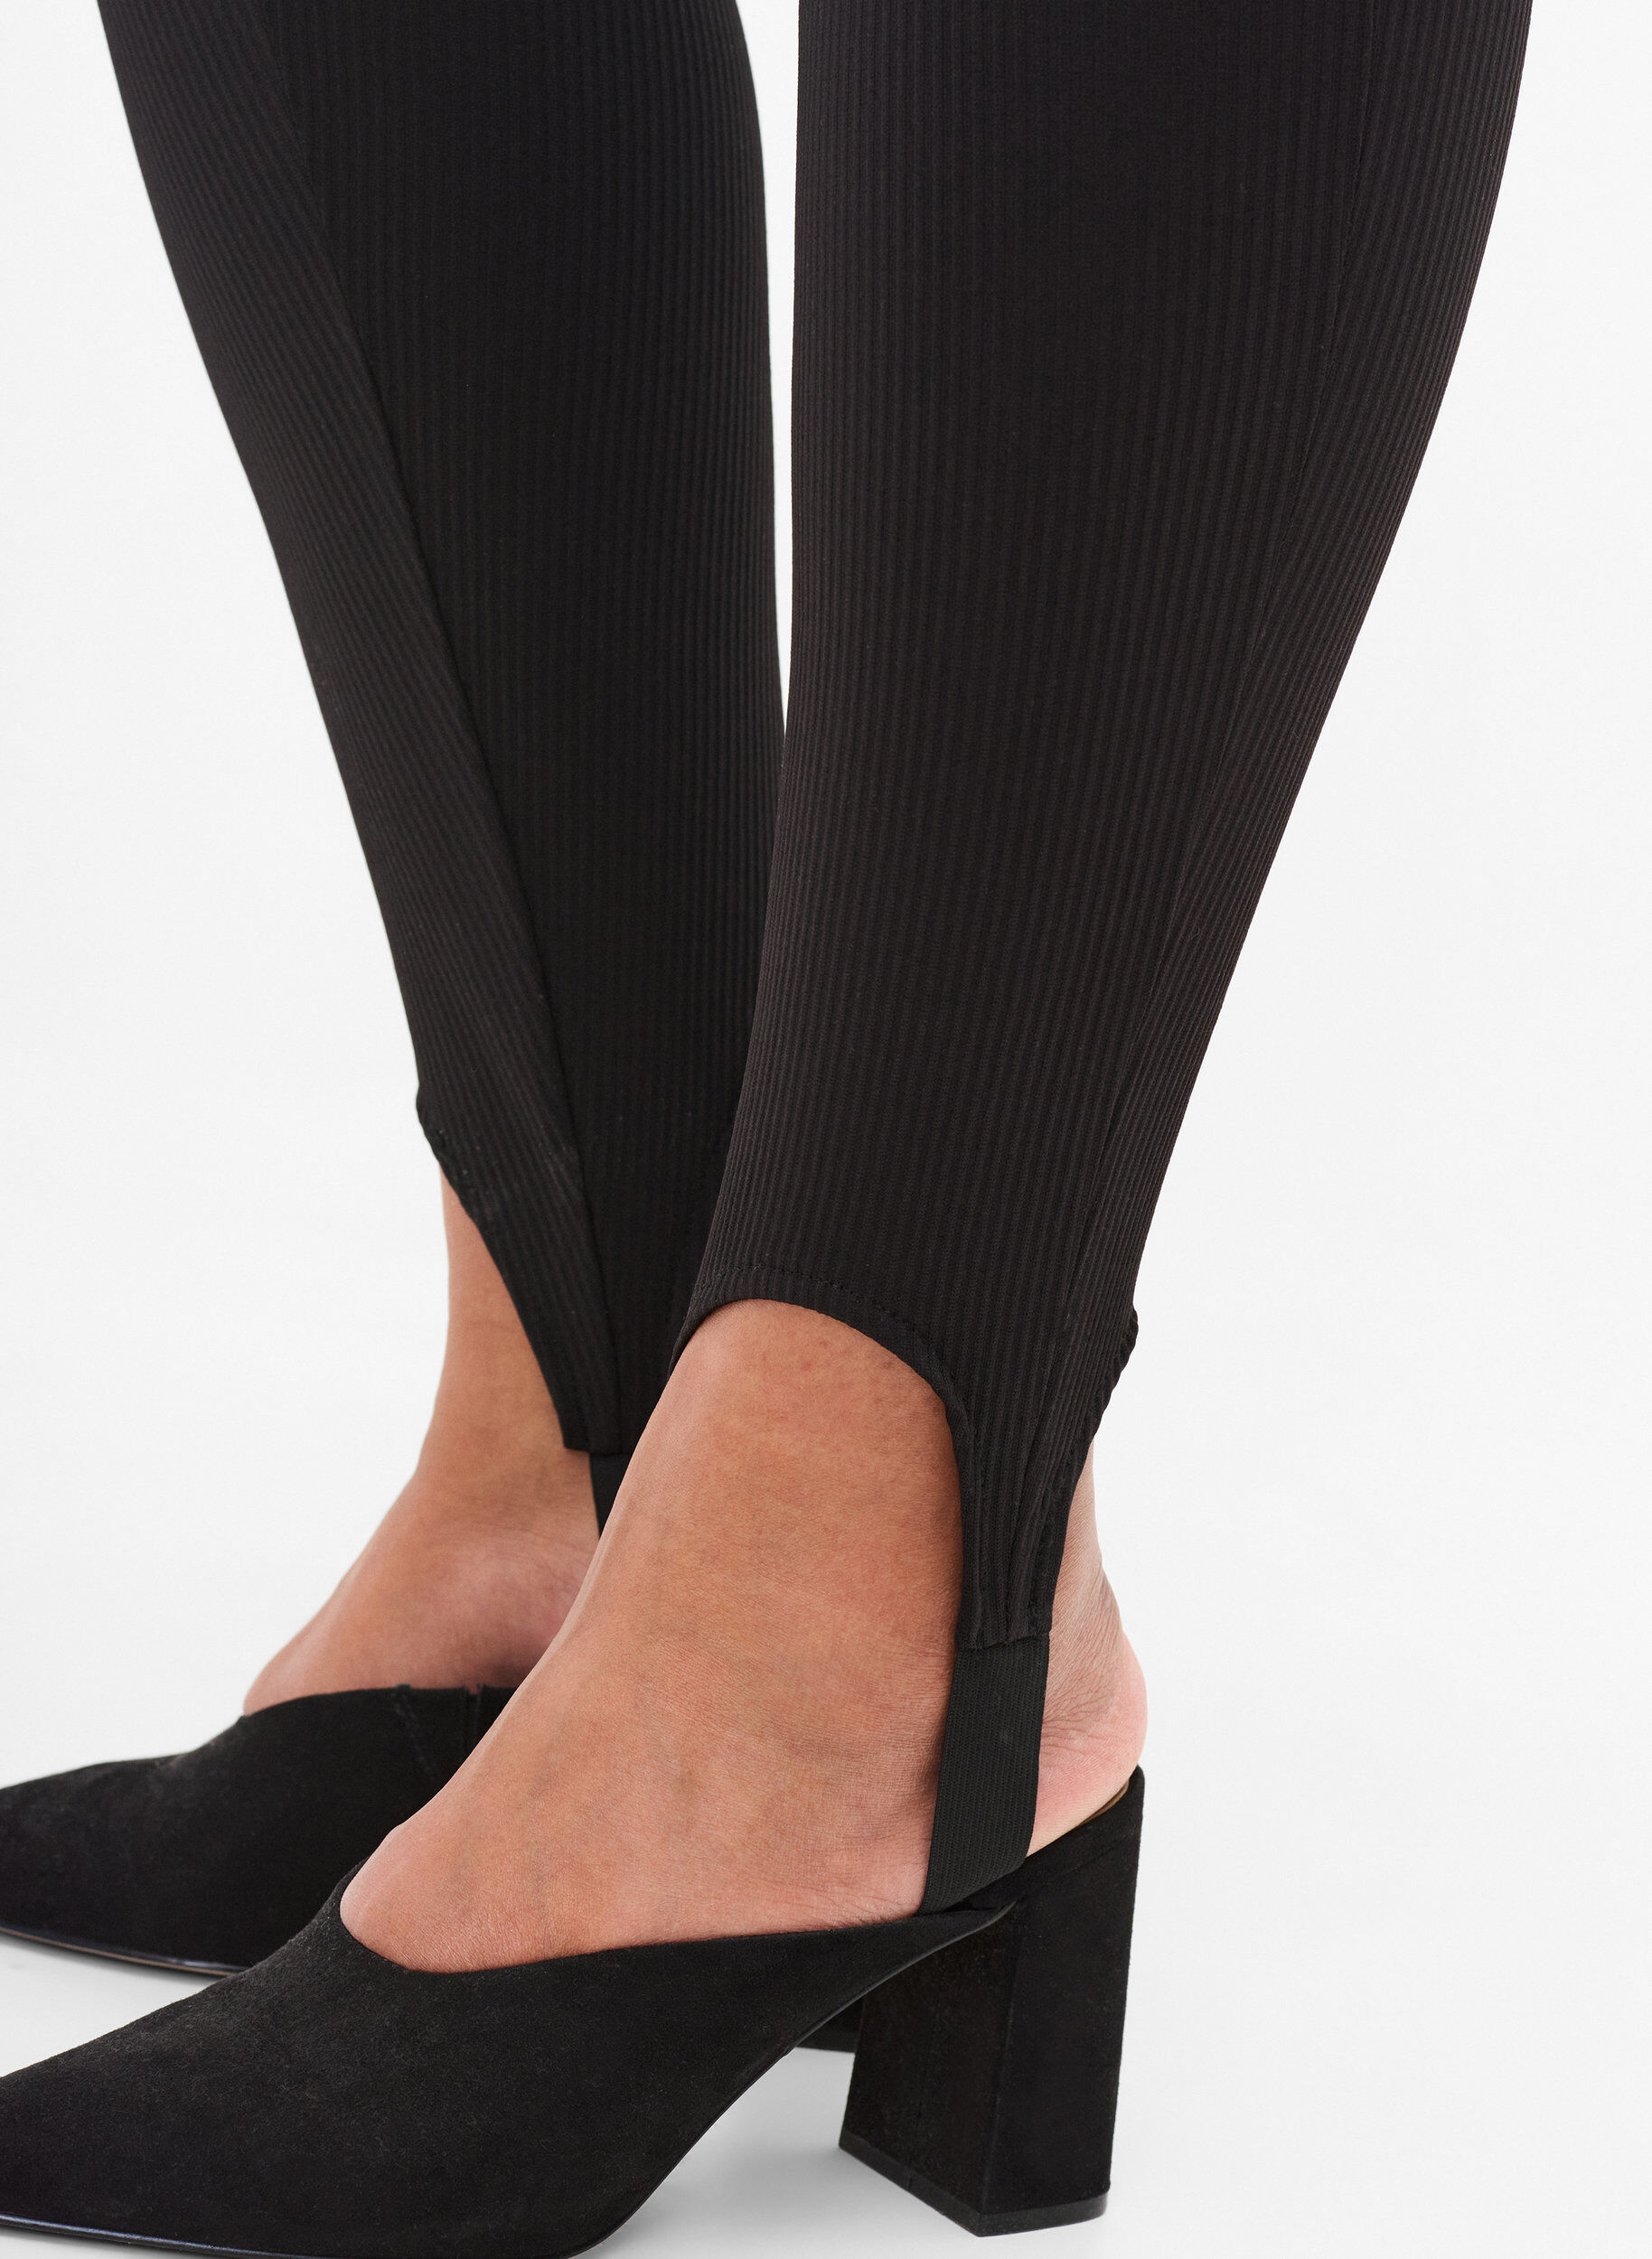 We Found The 20 Best Shoes to Wear With Leggings